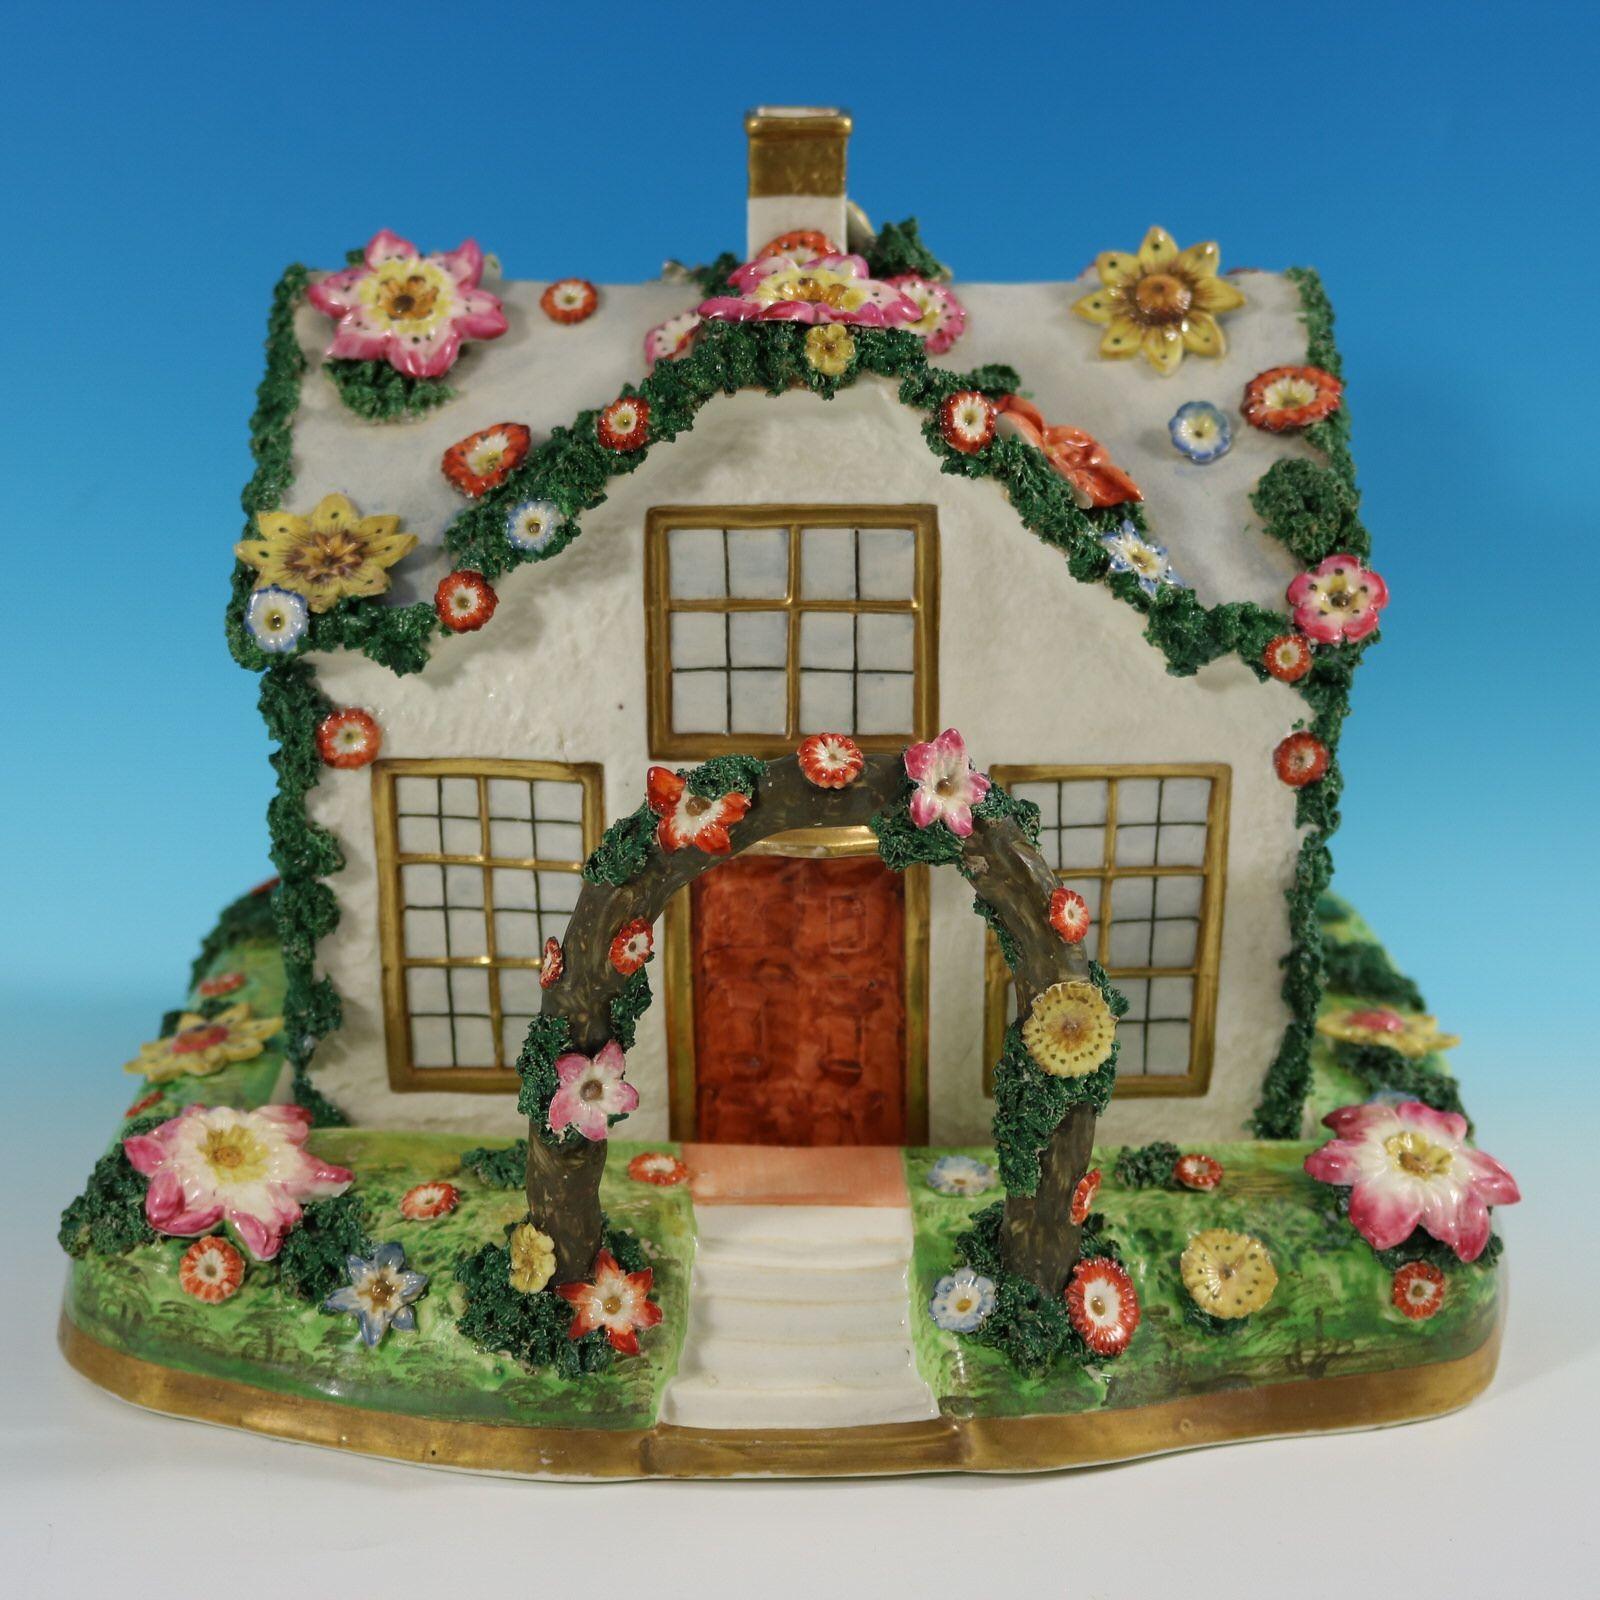 Staffordshire Pottery porcellaneous pastille burner which features a country cottage embellished with flowers. The house has stairs leading up to the front door, with an arbour arching overhead. The lid lifts off, revealing the pastille holder,